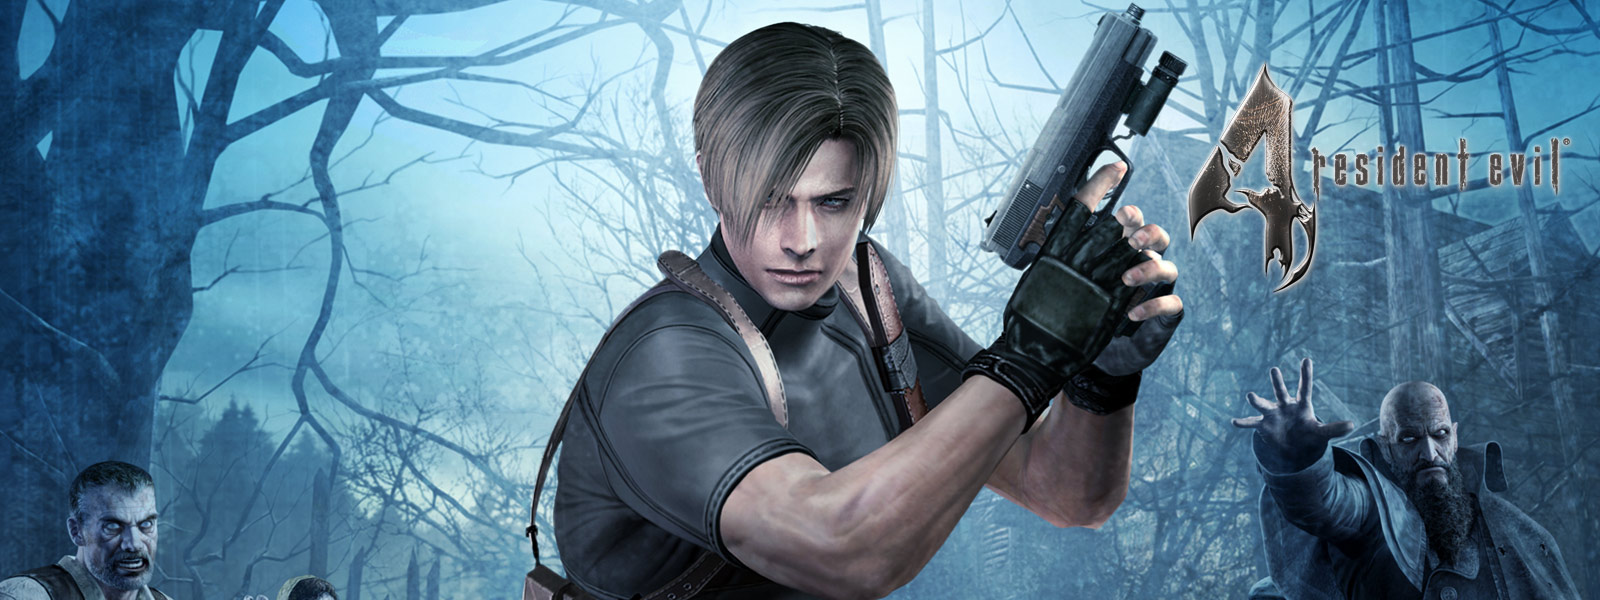 Resident Evil 4, character holding pistol in dark forest surrounded by zombies